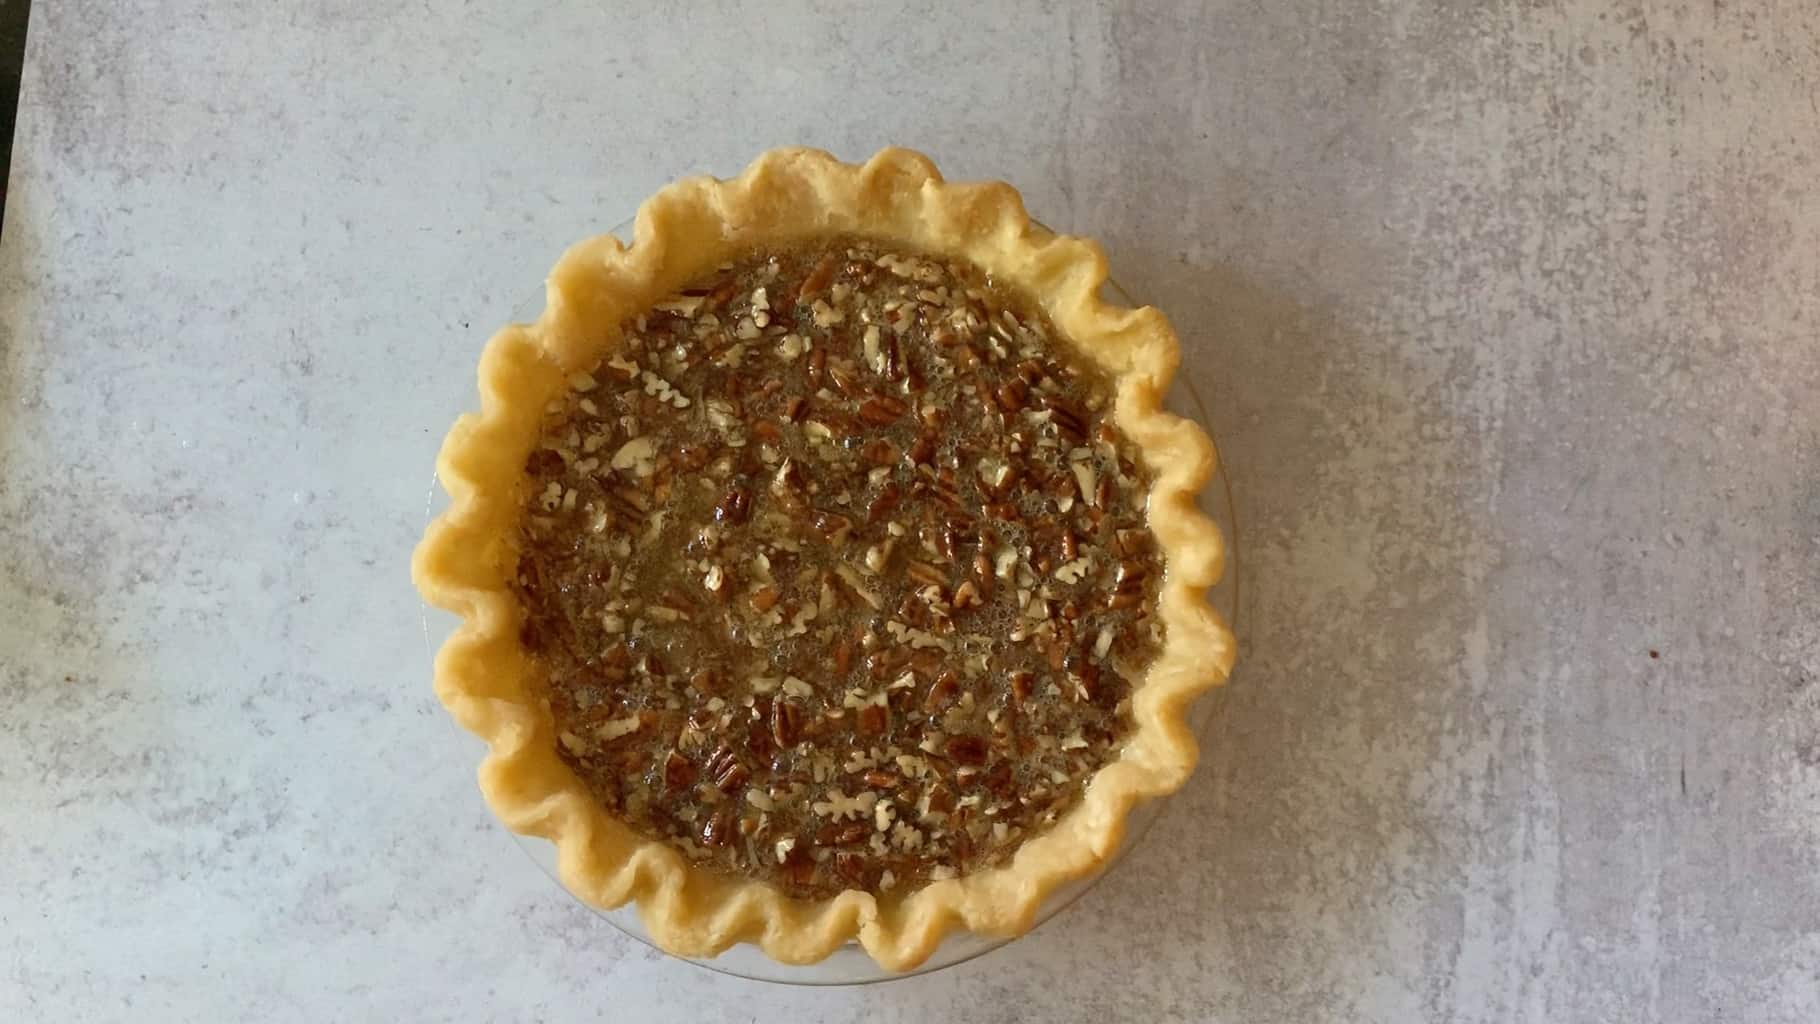 unbaked pecan pie ready to go in the oven